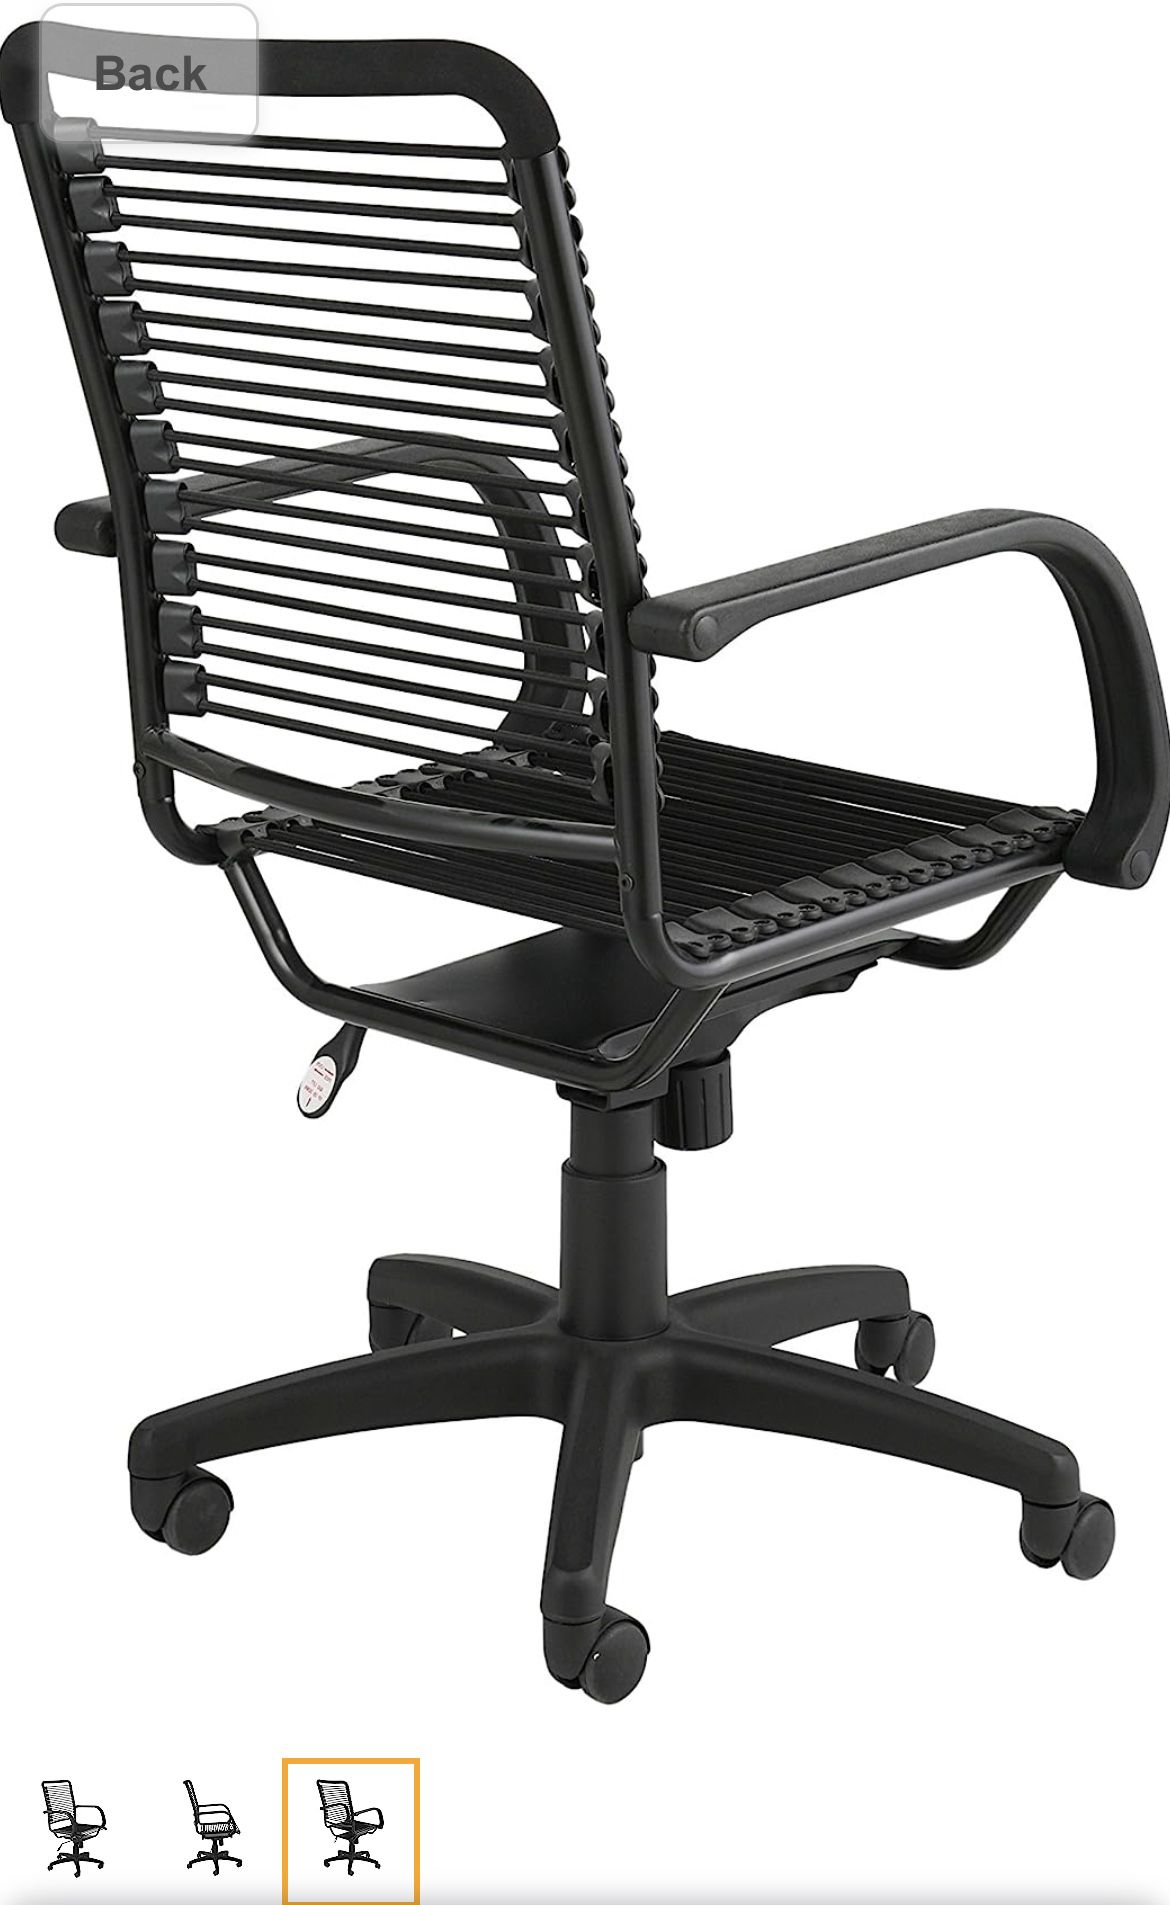 Euro Style Bungie High Back Adjustable Office Chair with Arms and Foam Top Cover, Black Bungies with Graphite Black Frame